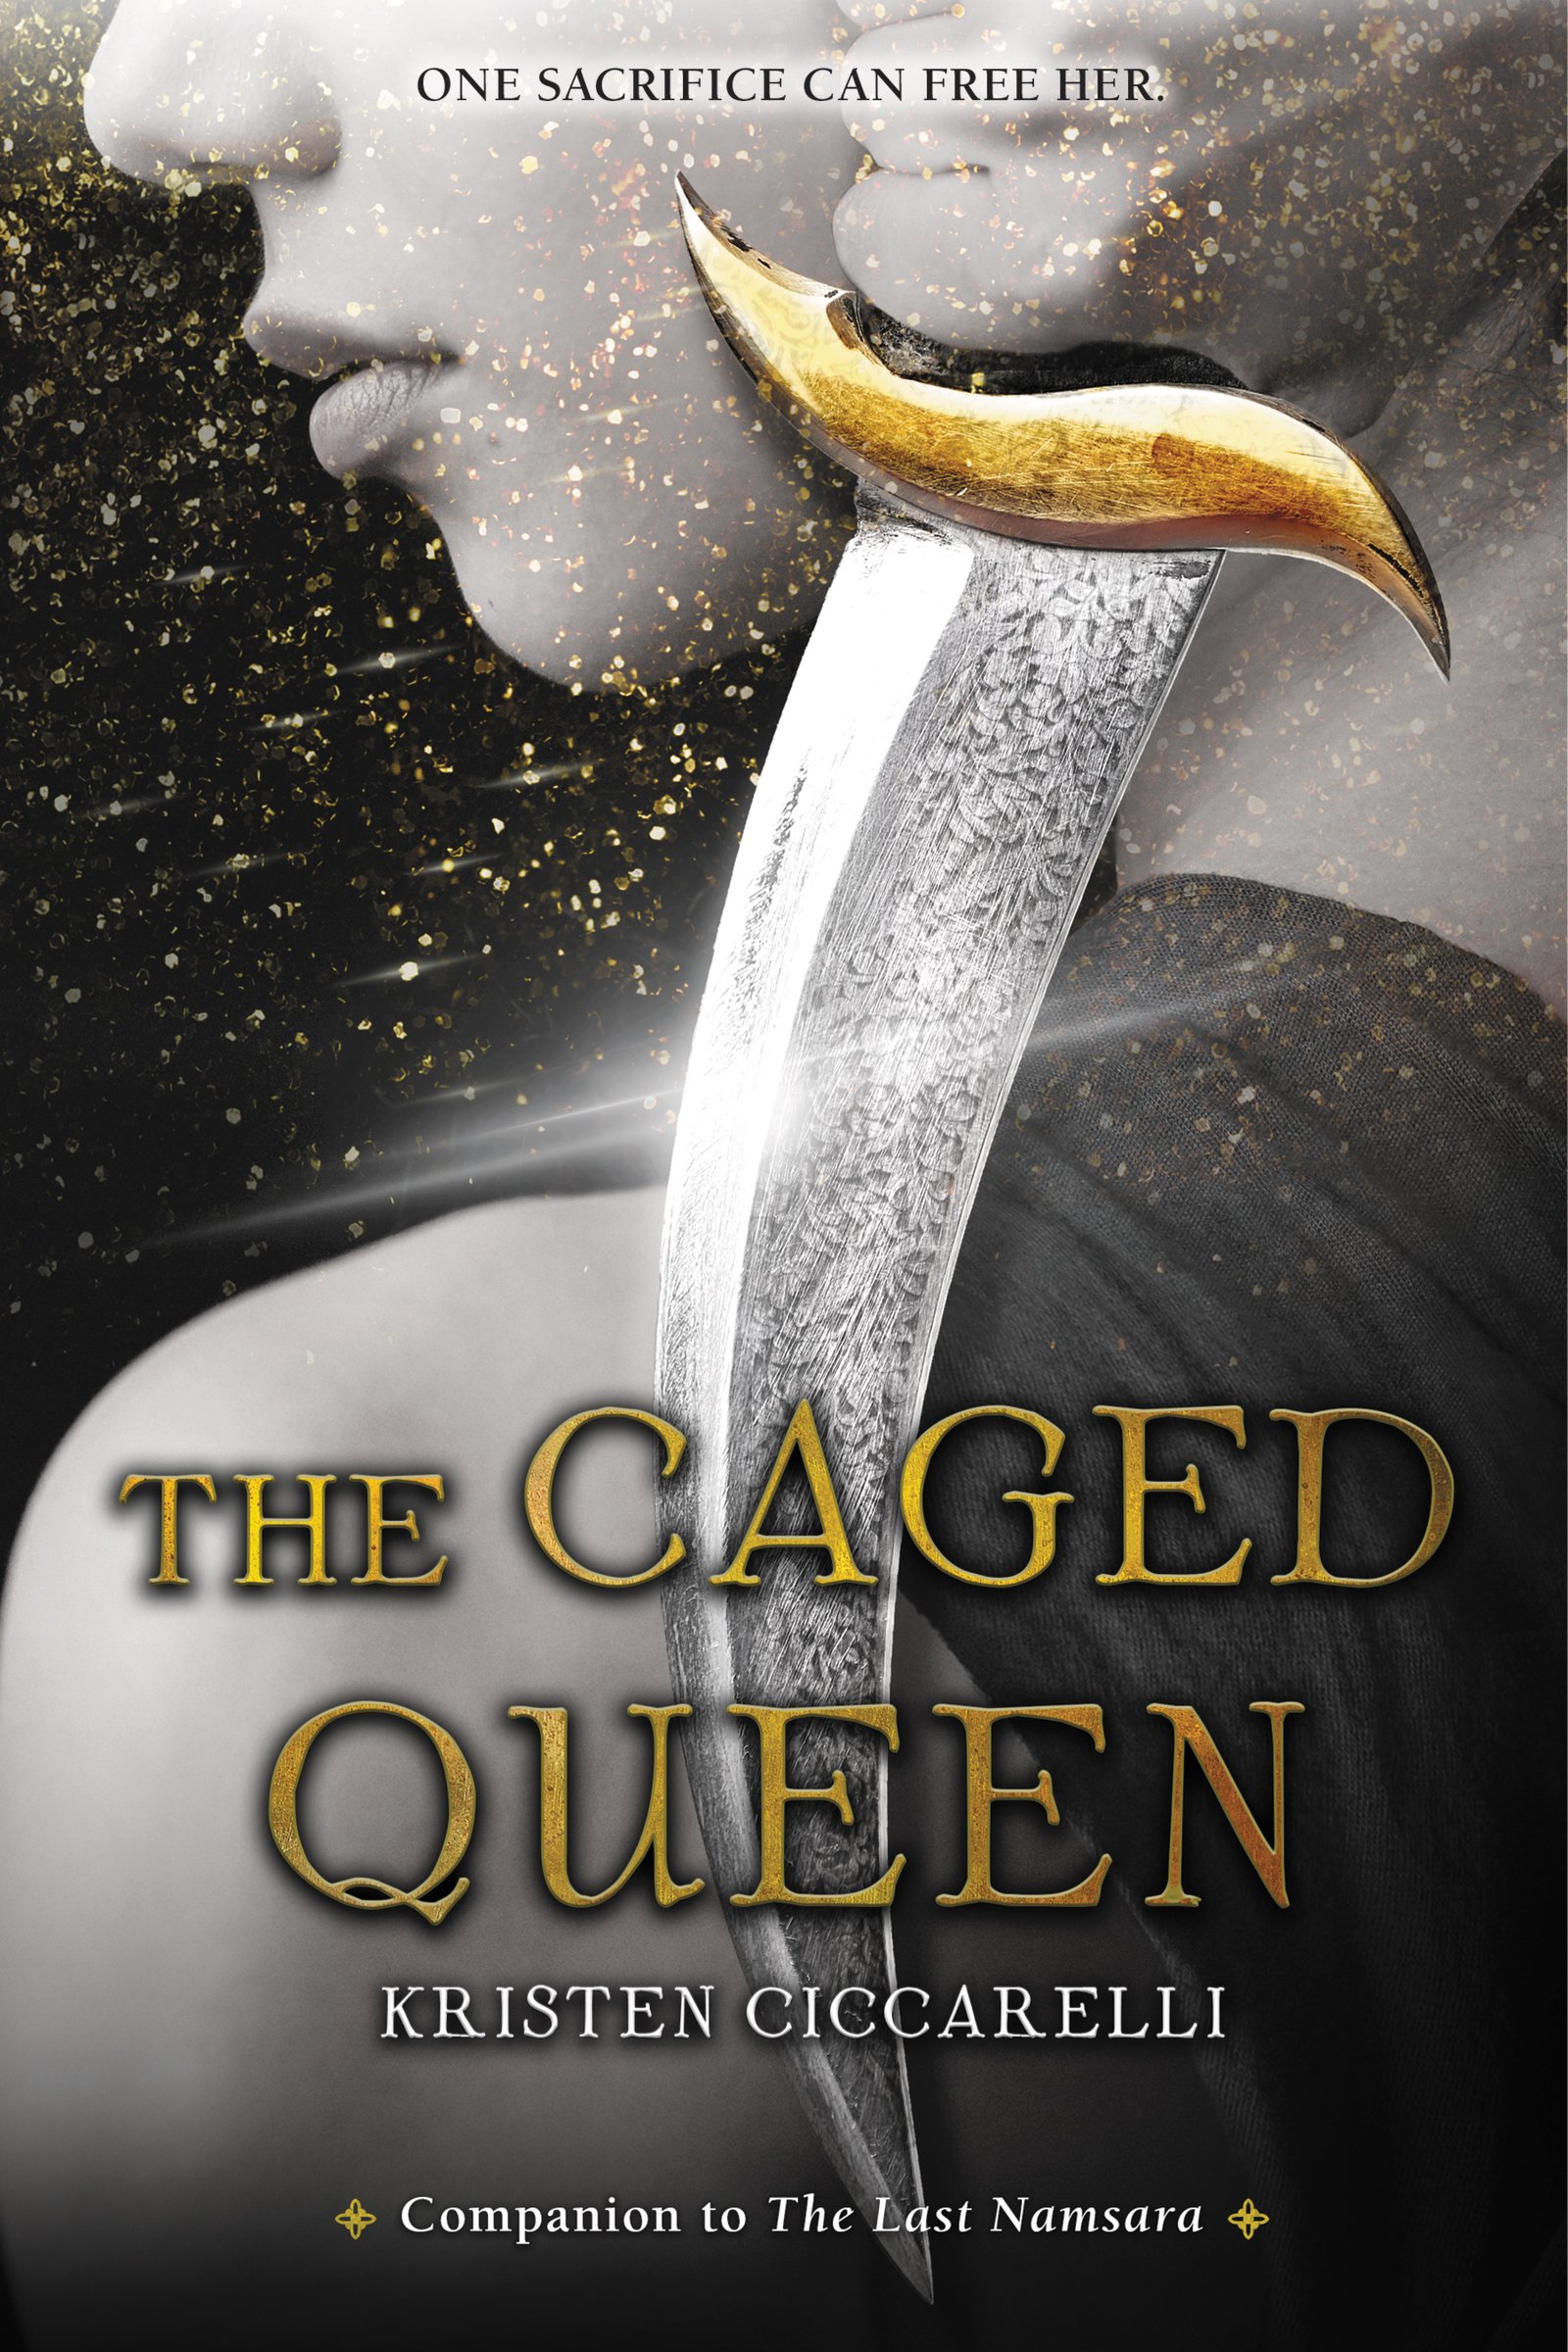 the caged queen by Kristen Ciccarelli - Utopia State of Mind